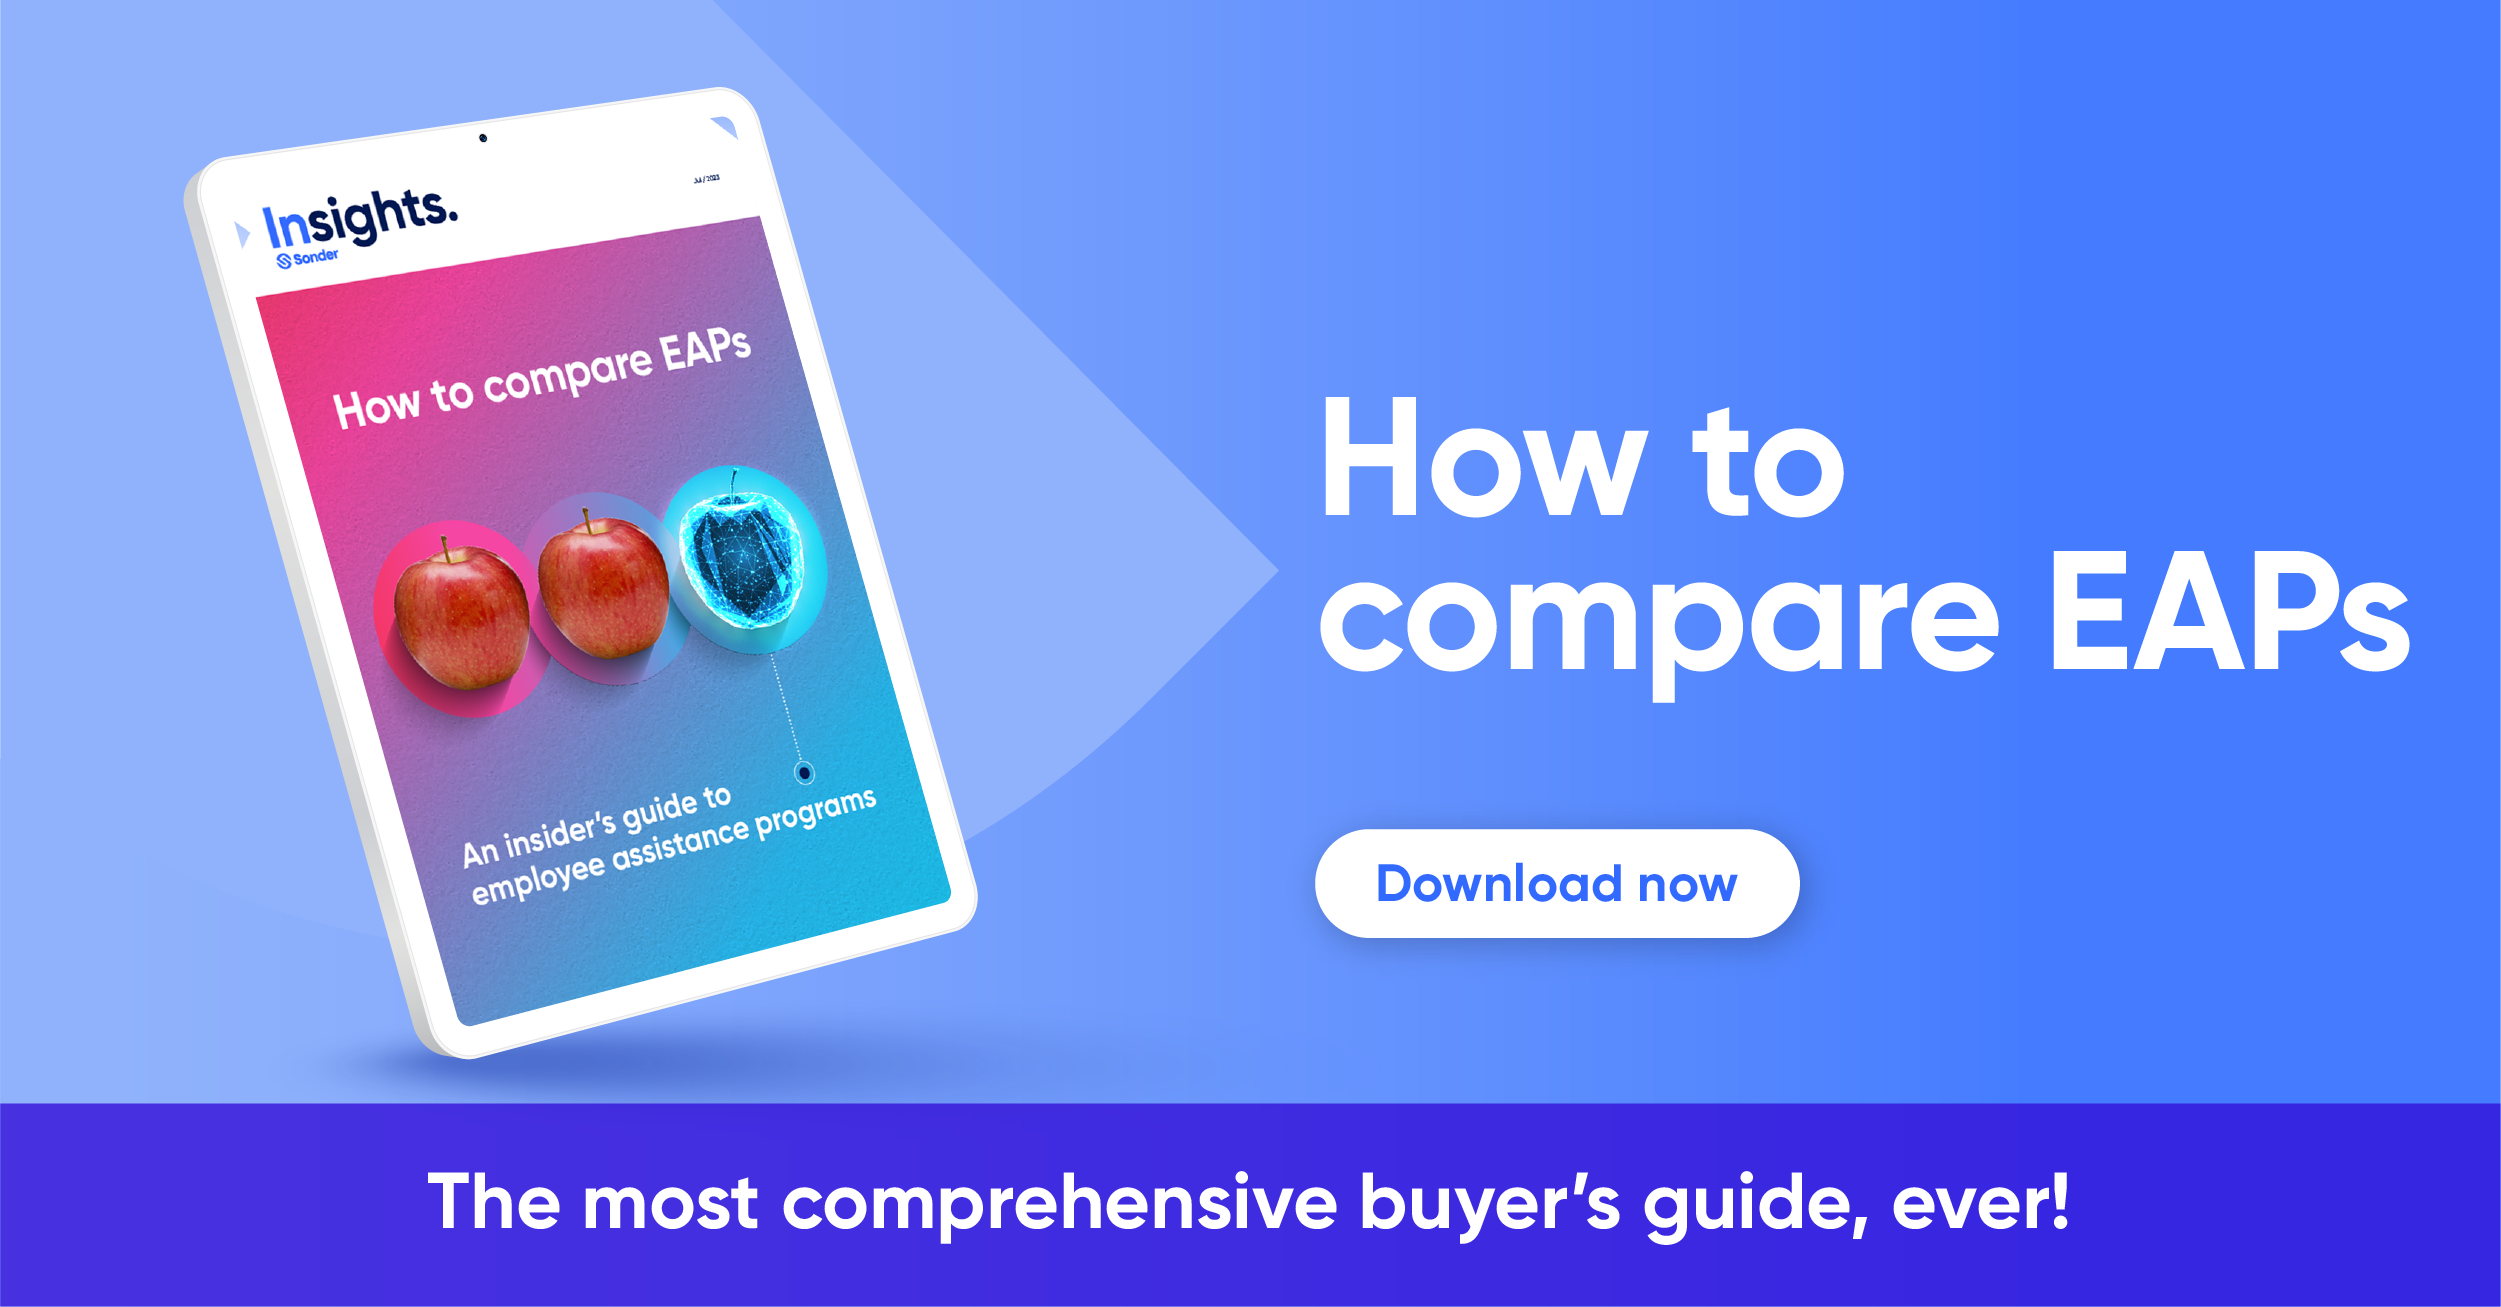 LinkedIn banner - How to compare EAPs - The most comprehensive buyer's guide ever